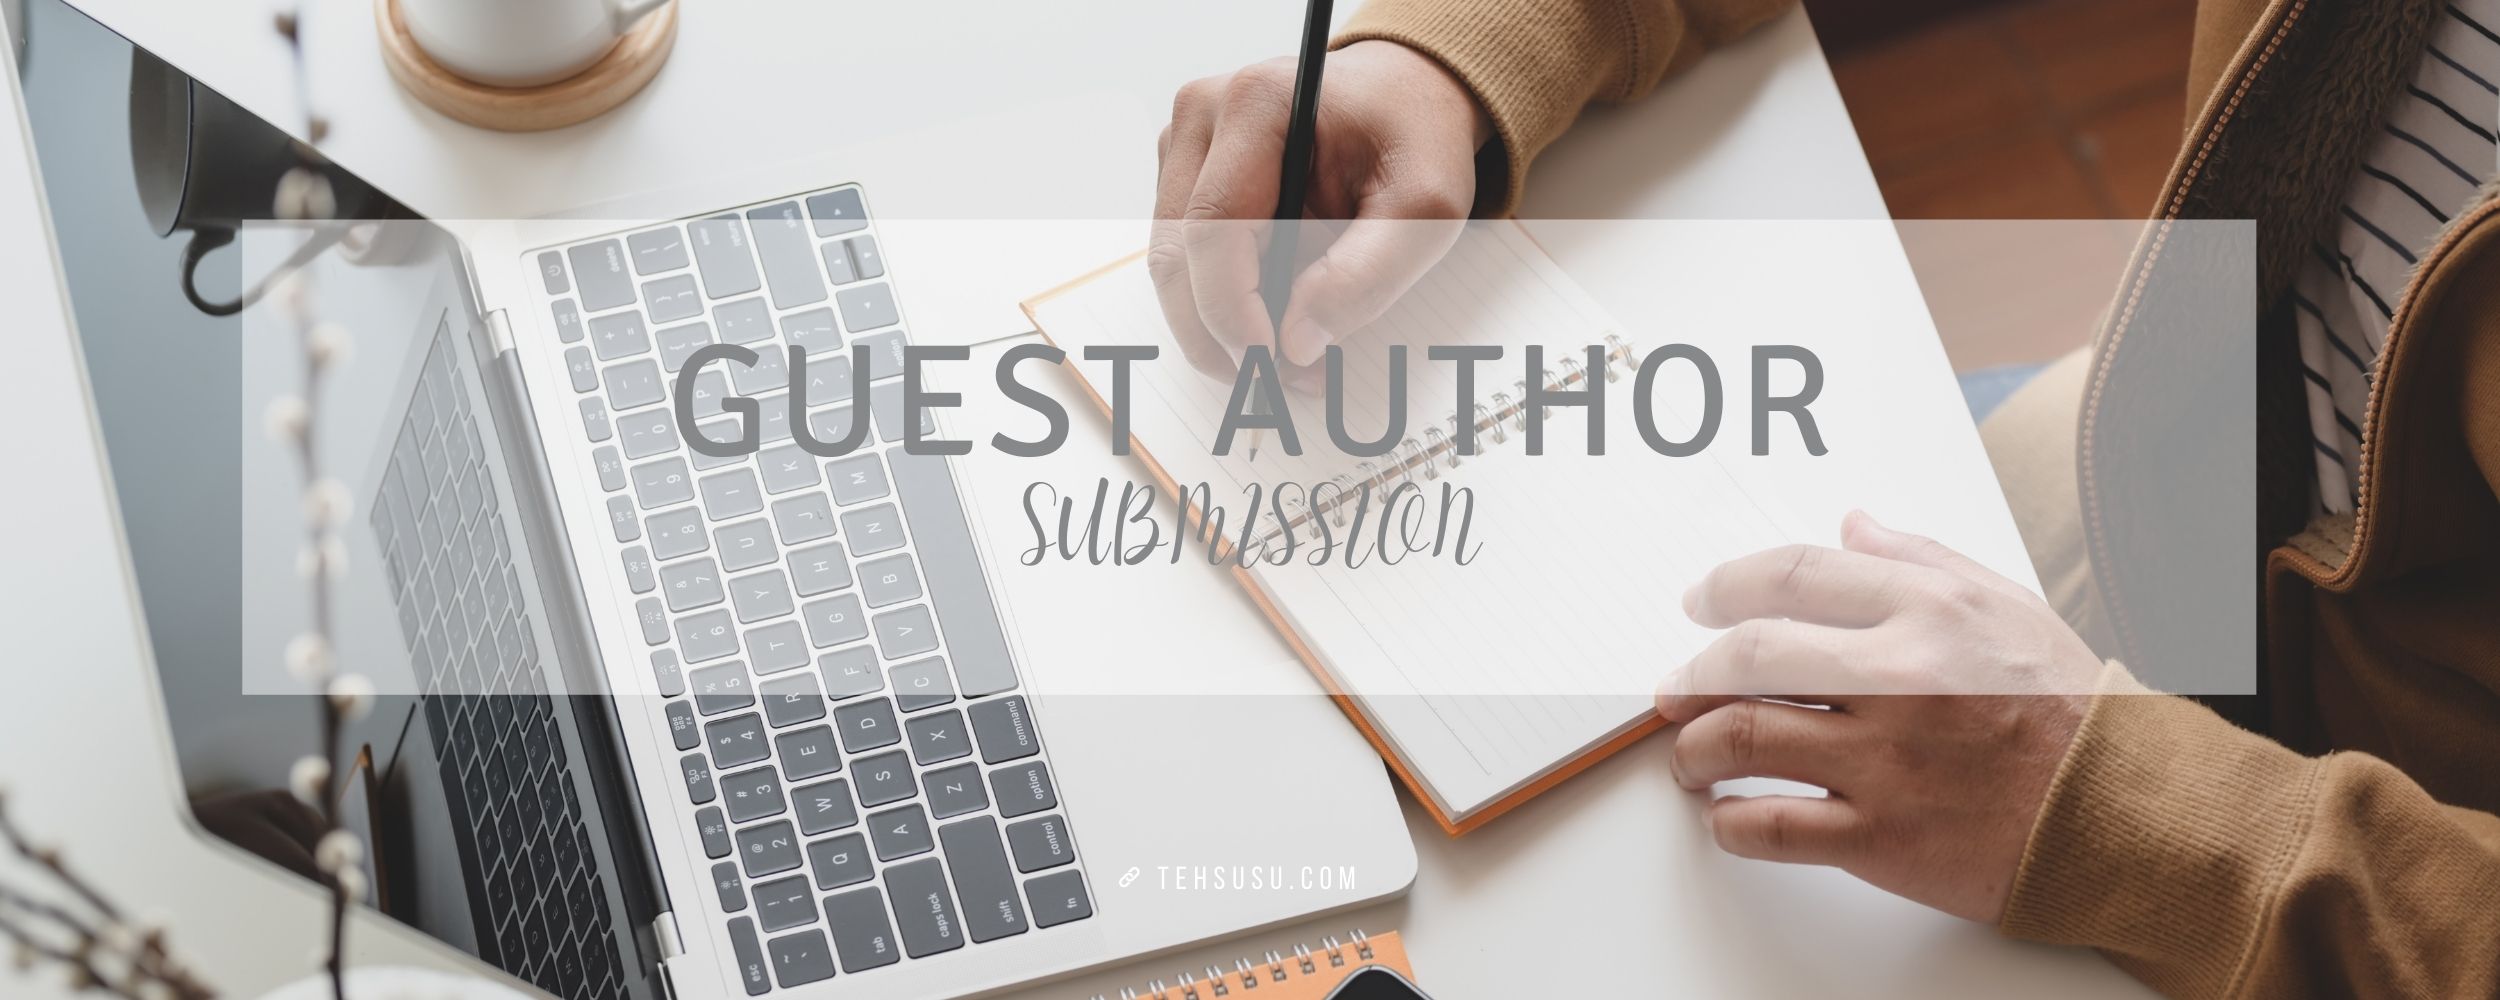 guess author submission